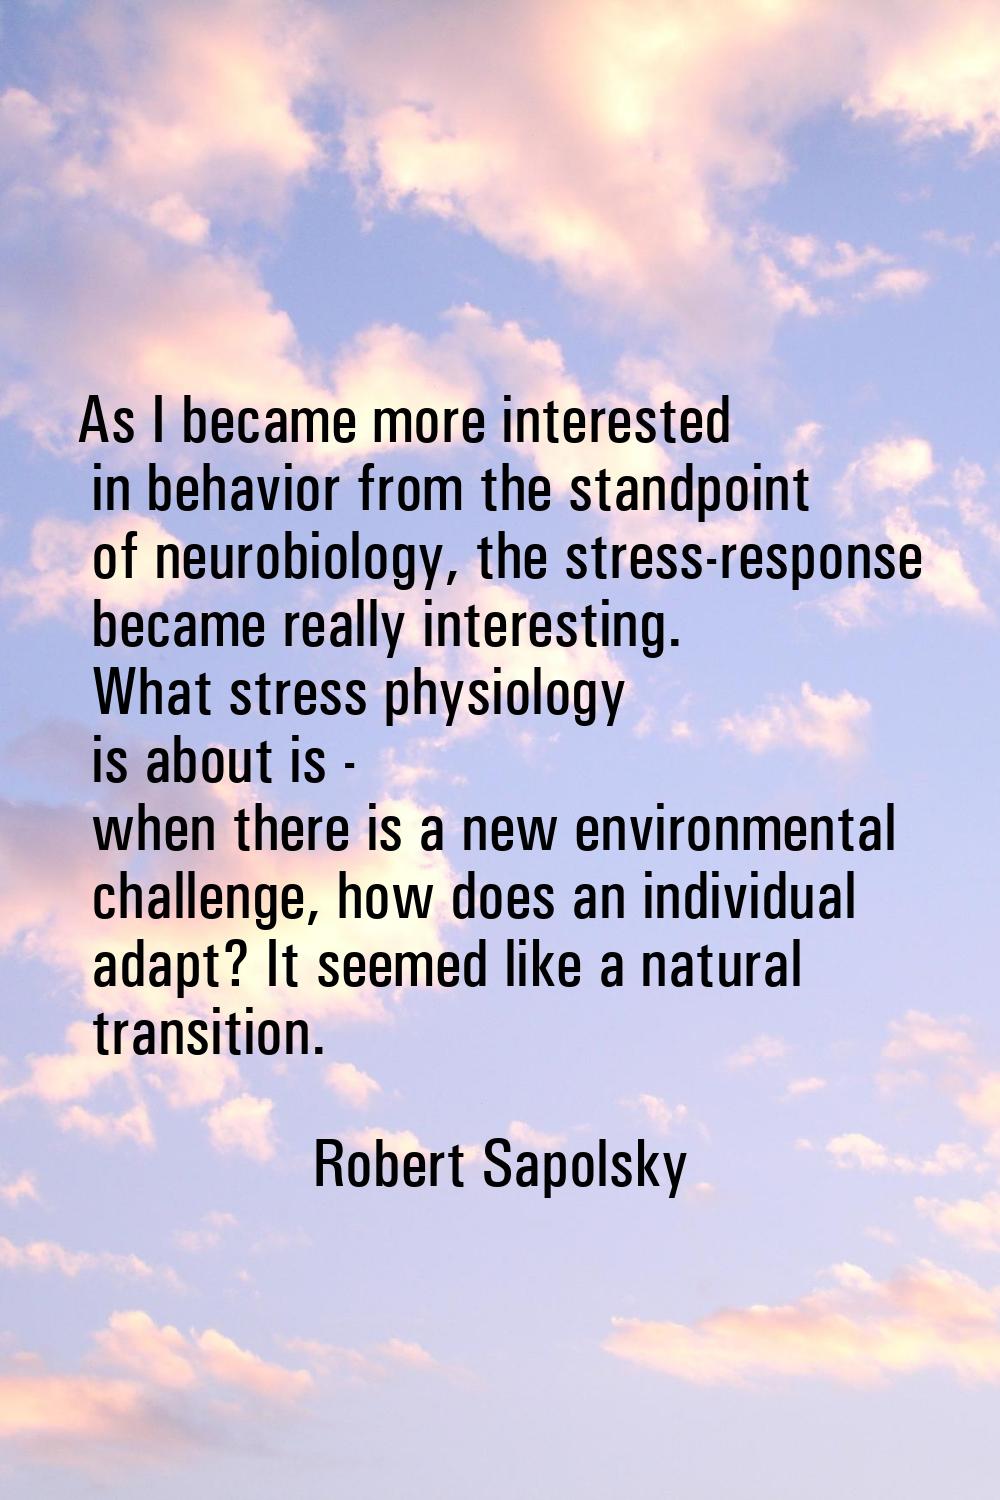 As I became more interested in behavior from the standpoint of neurobiology, the stress-response be